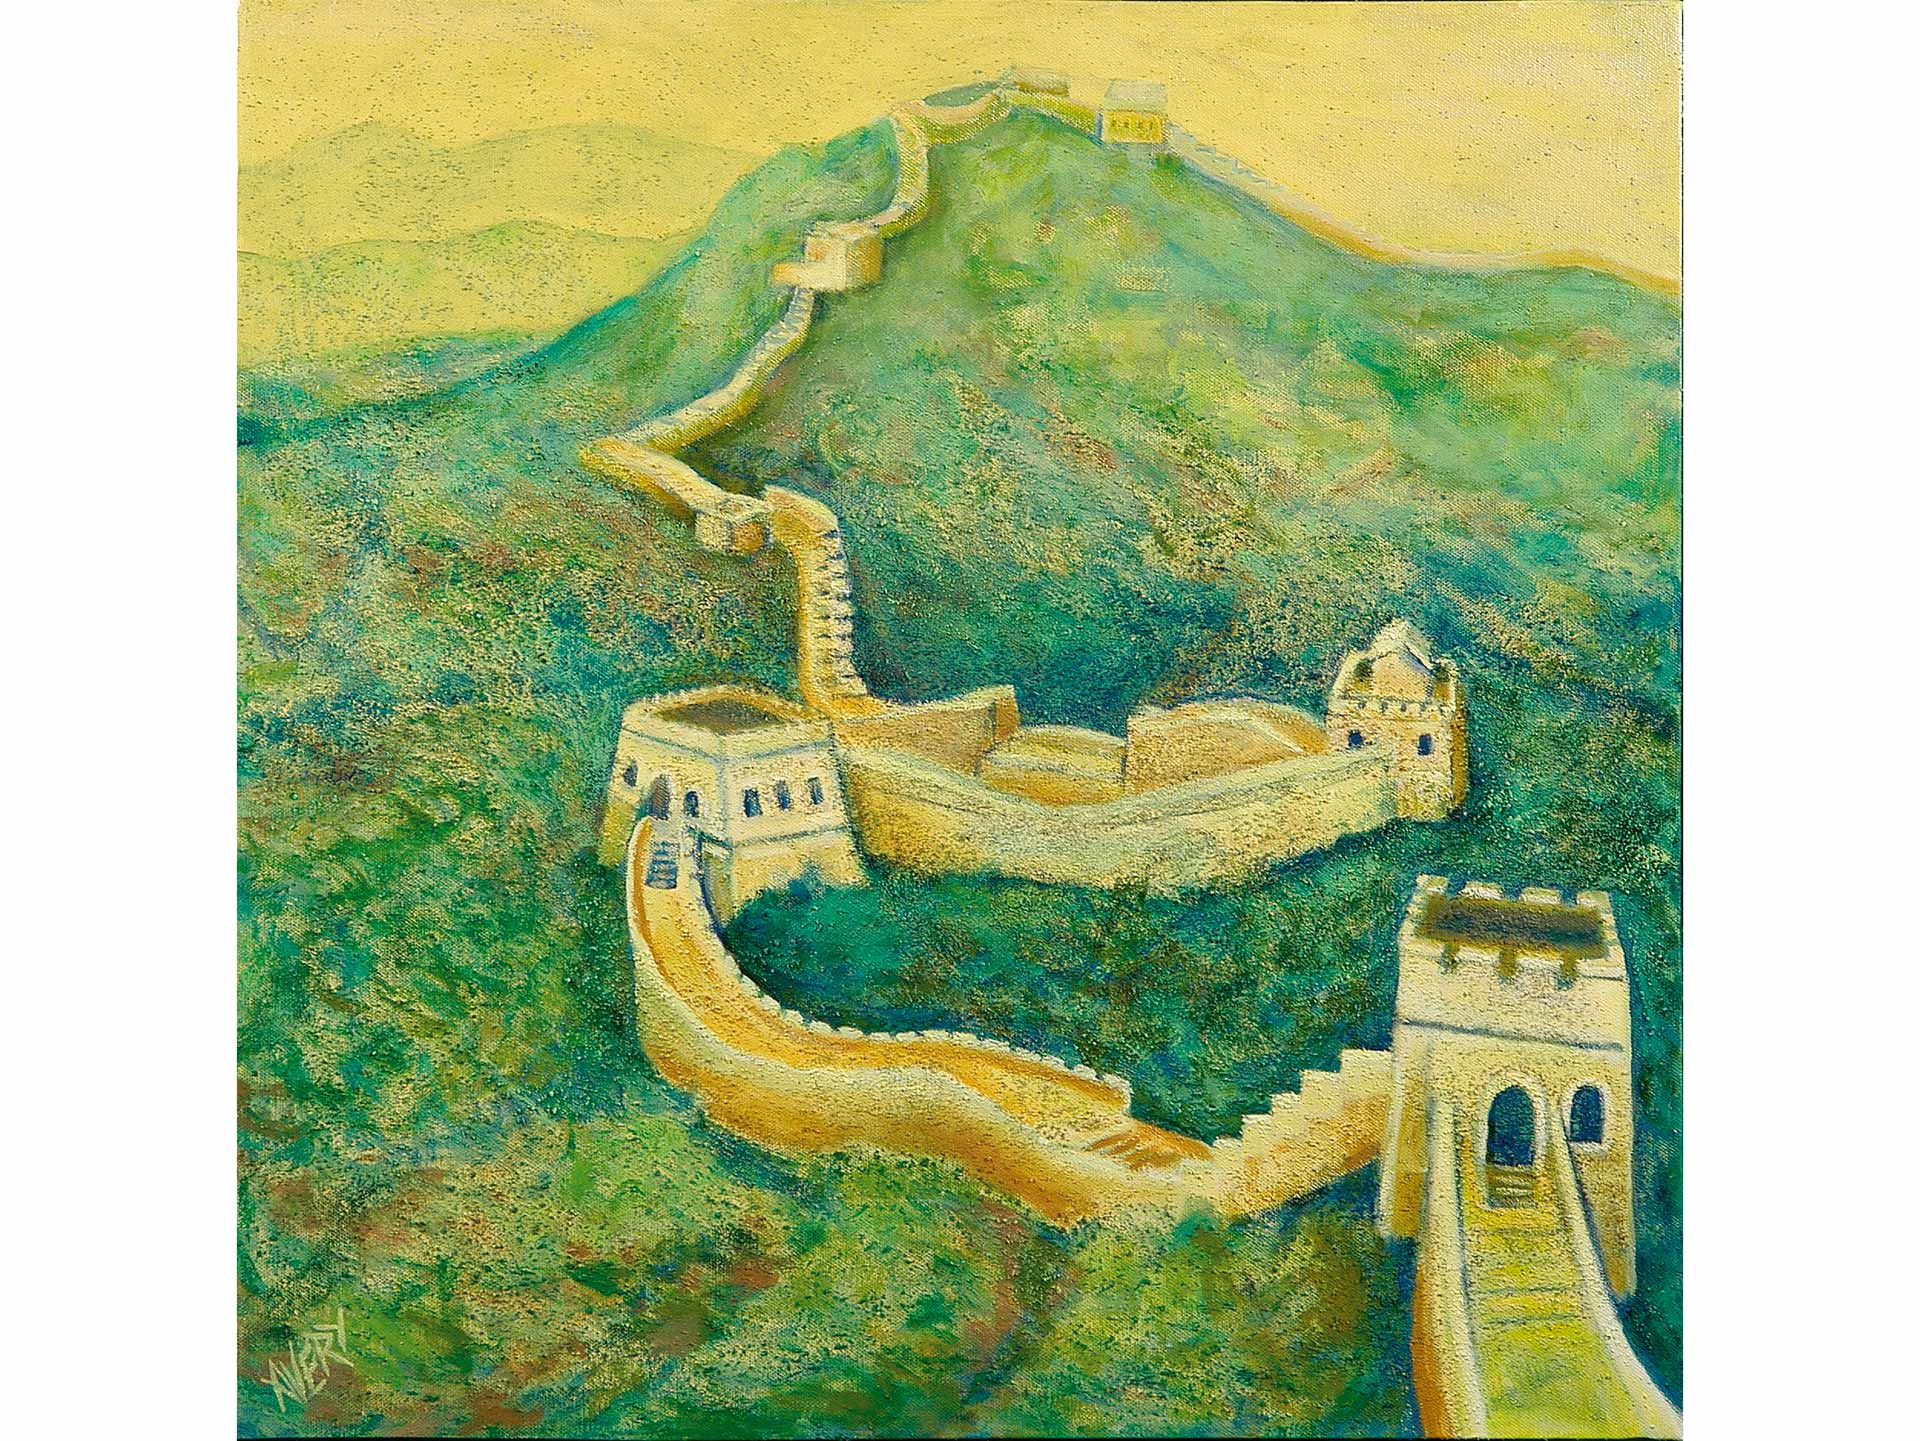 Lauren Avery Hutton | Great Wall, oil and sand, 24x24, 2003